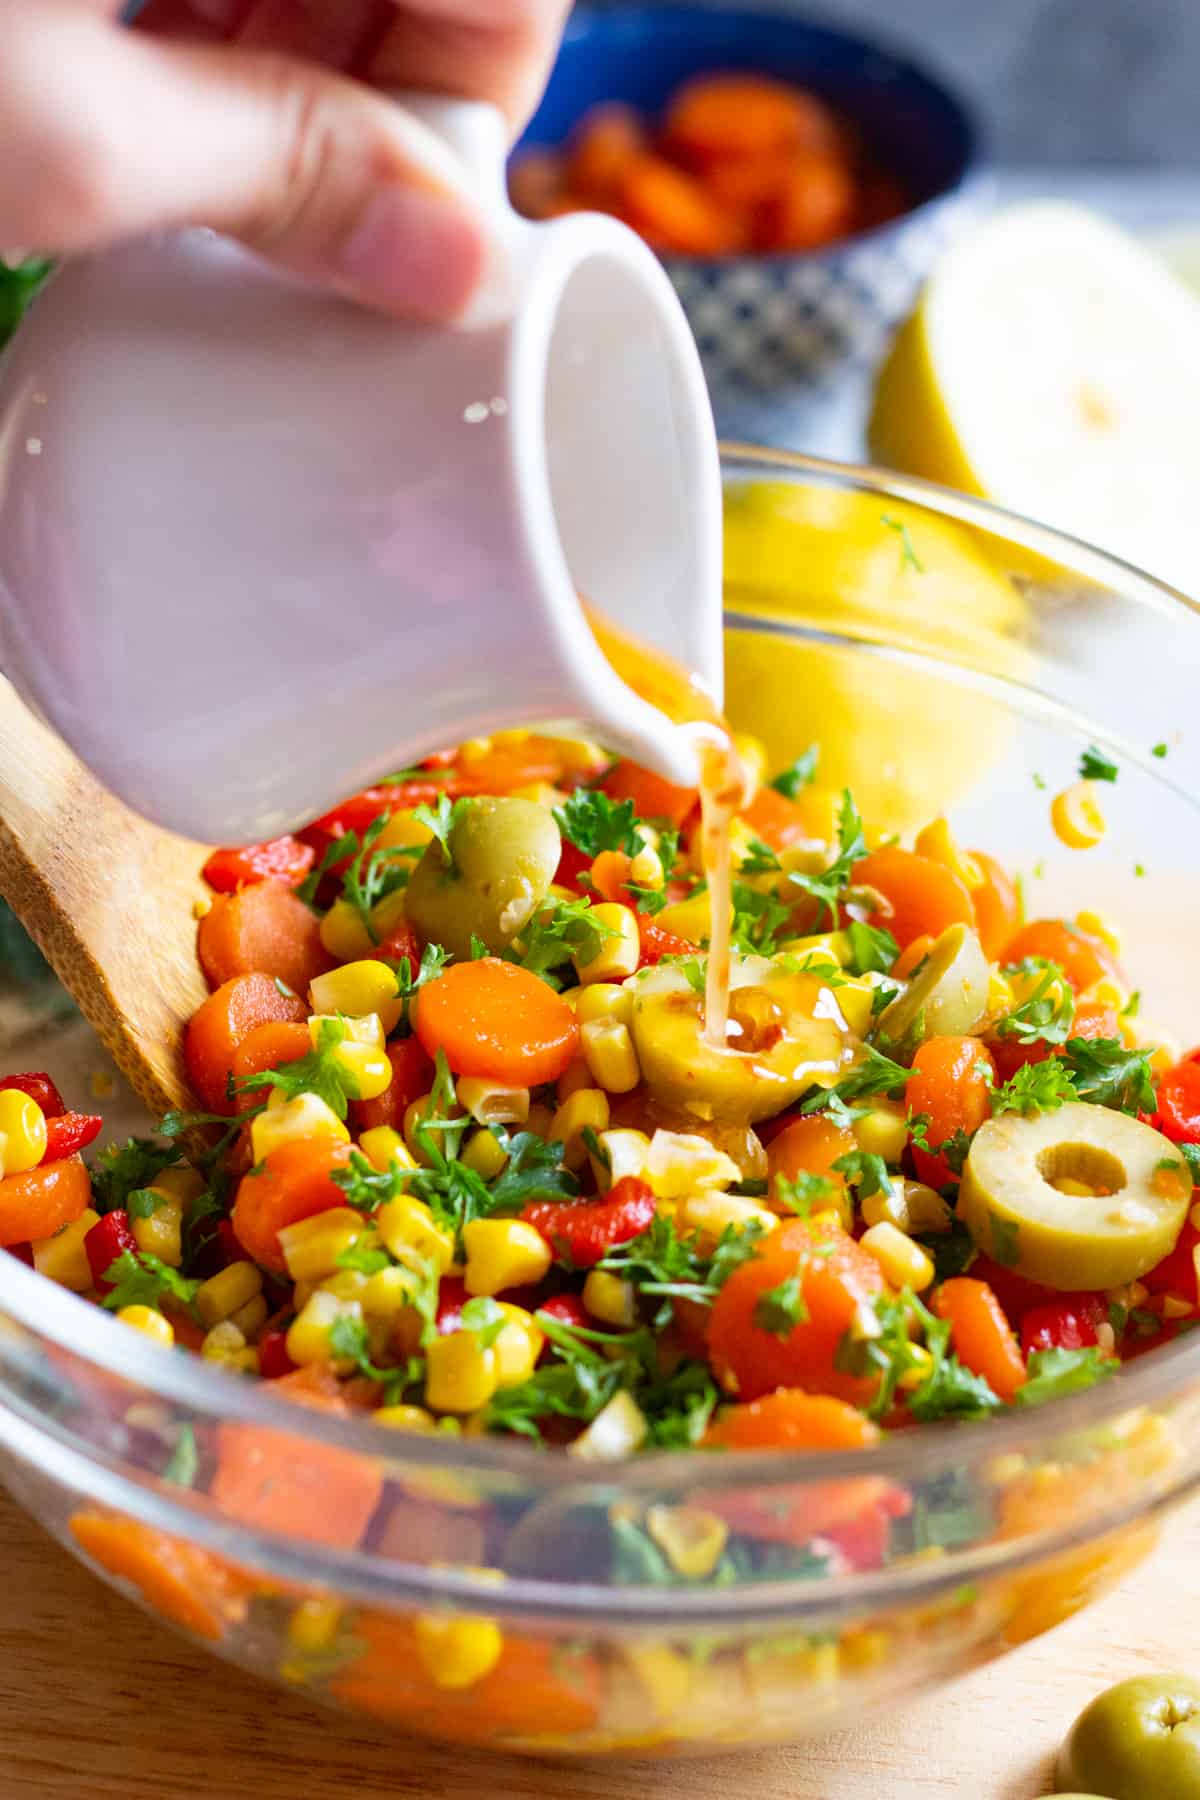 The dressing for this Mediterranean corn salad is made with olive oil, lemon juice, aleppo pepper and salt.